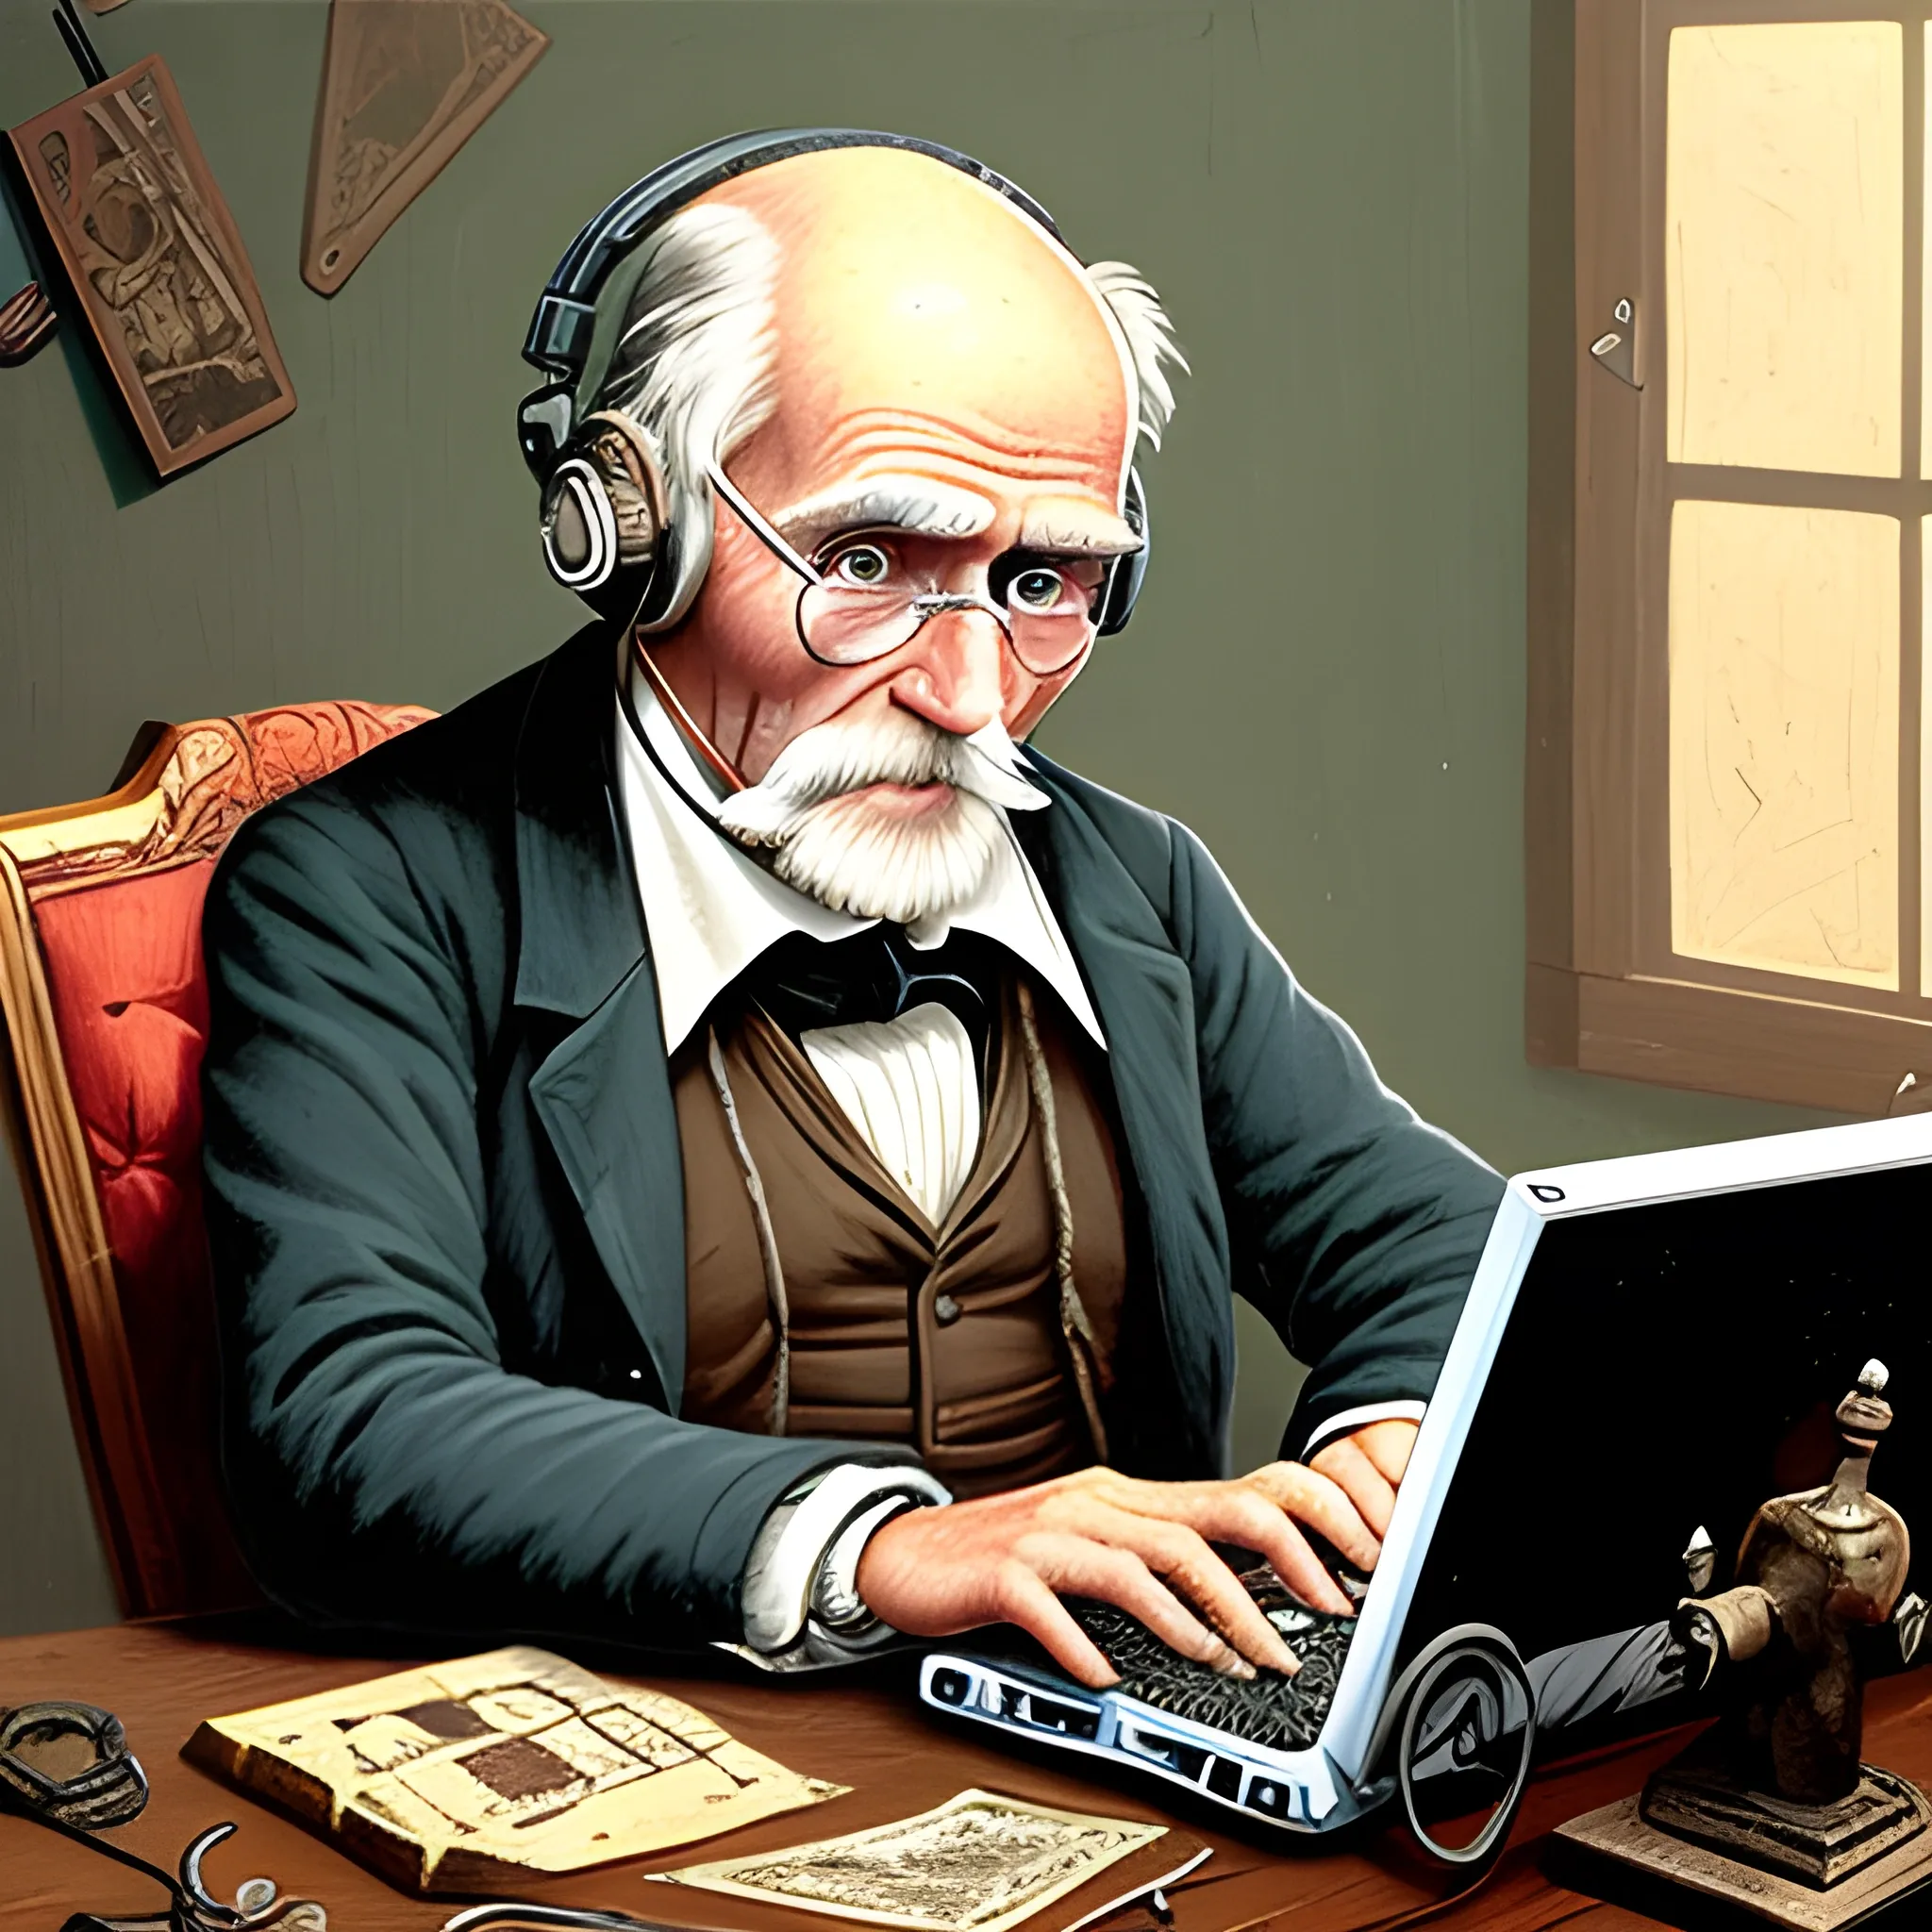 Old man from 1800s traying to use some techonology gadgtes as computer, head phones, video games, Cartoon, Comic Book, Old Paint